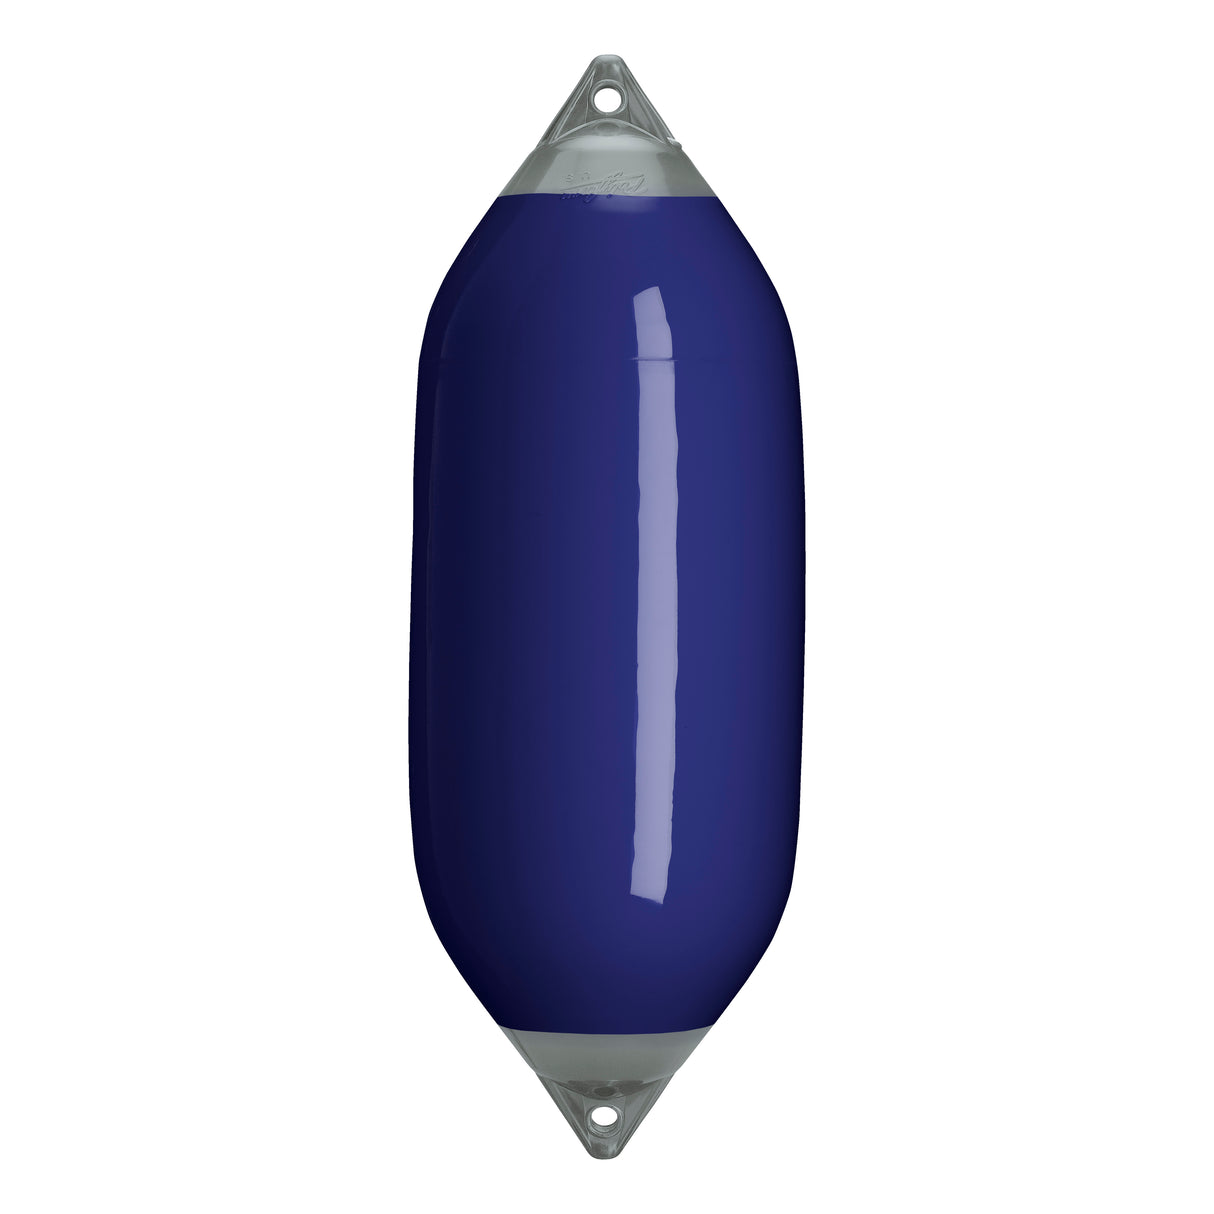 Navy Blue boat fender with Grey-Top, Polyform F-7